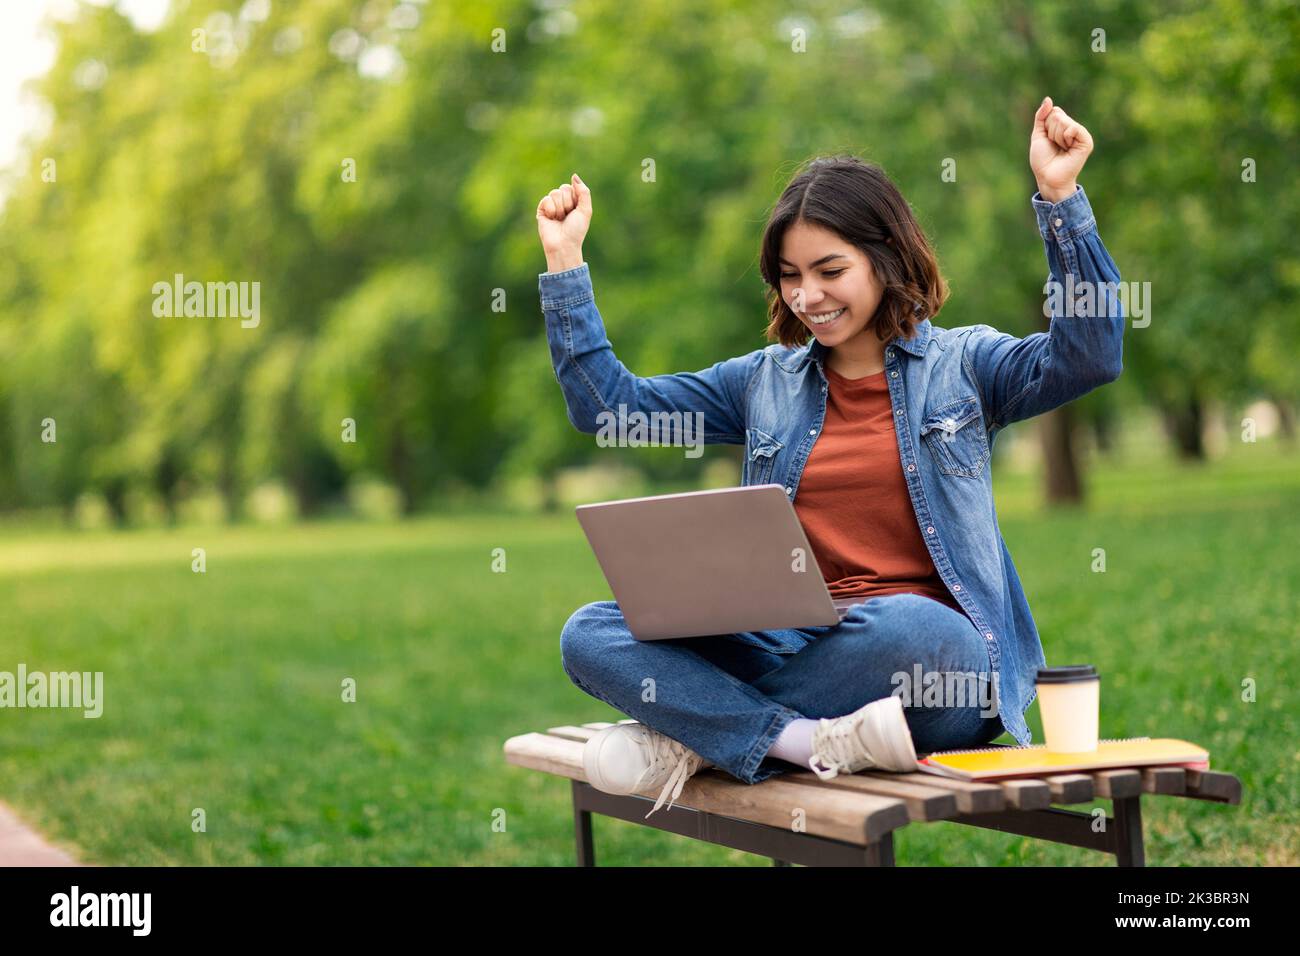 Beautiful Middle Eastern Female Student Celebrating Success With Laptop Outdoors Stock Photo